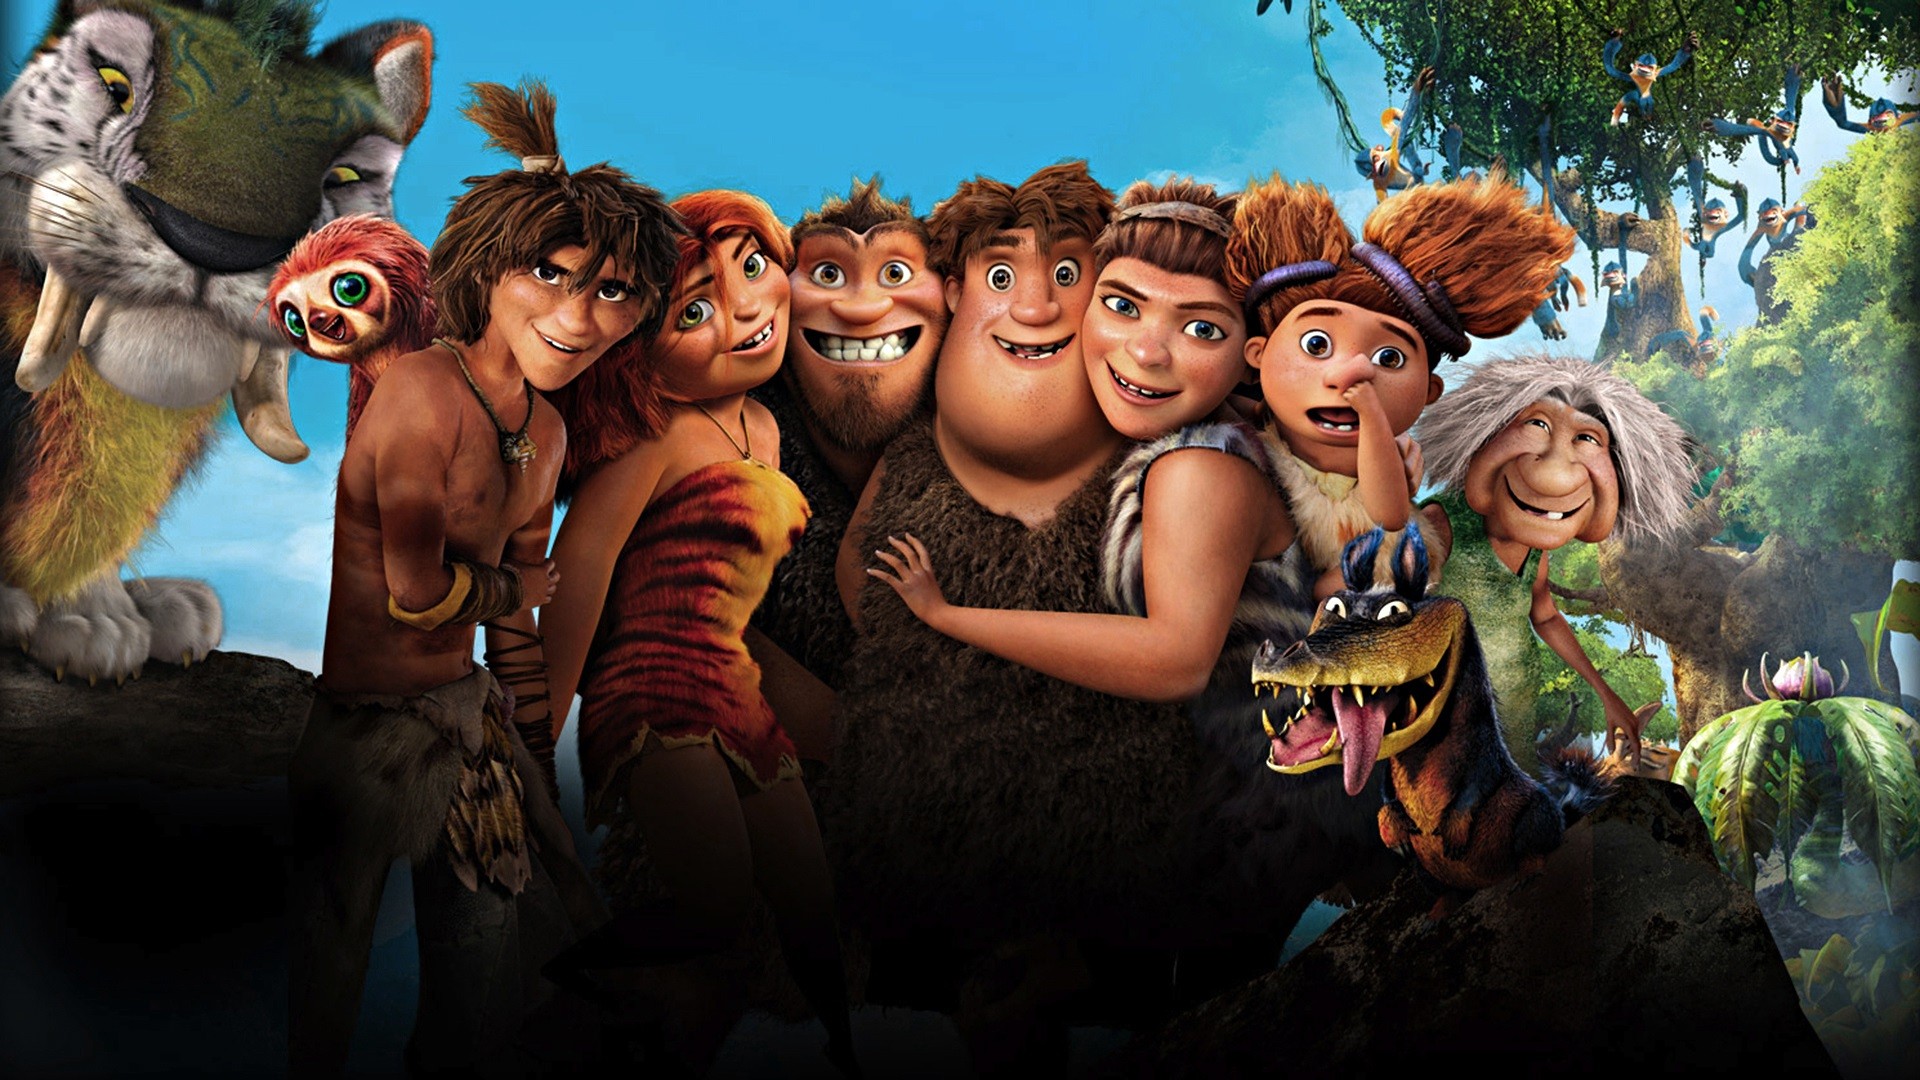 The Croods background